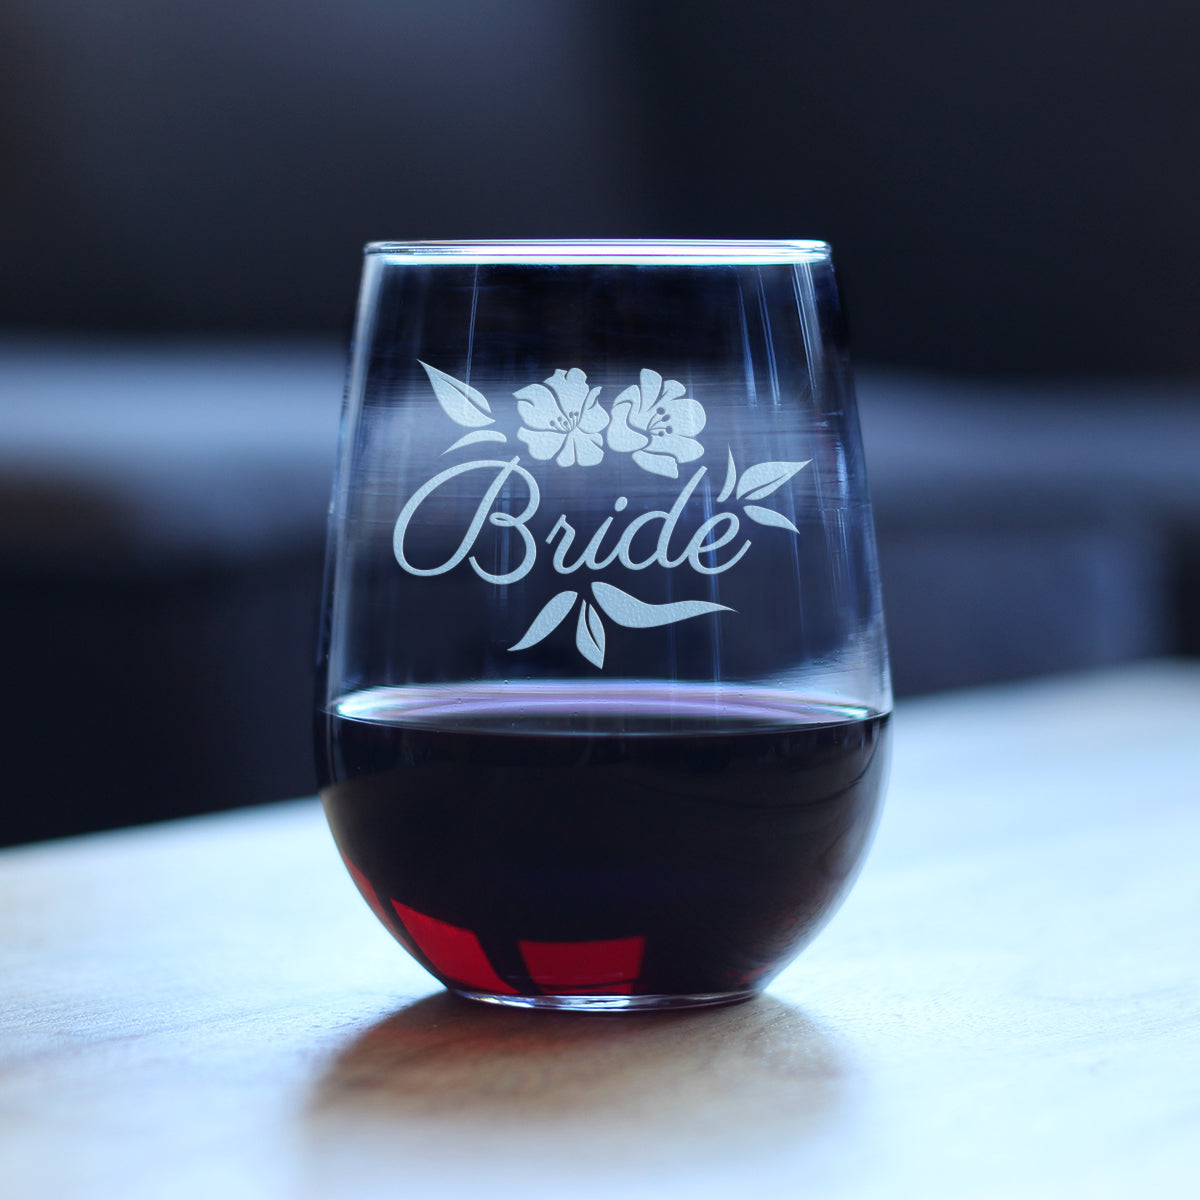 Bride Stemless Wine Glass - Unique Wedding Gift for Bride - Cute Engraved Wedding Cup Gift